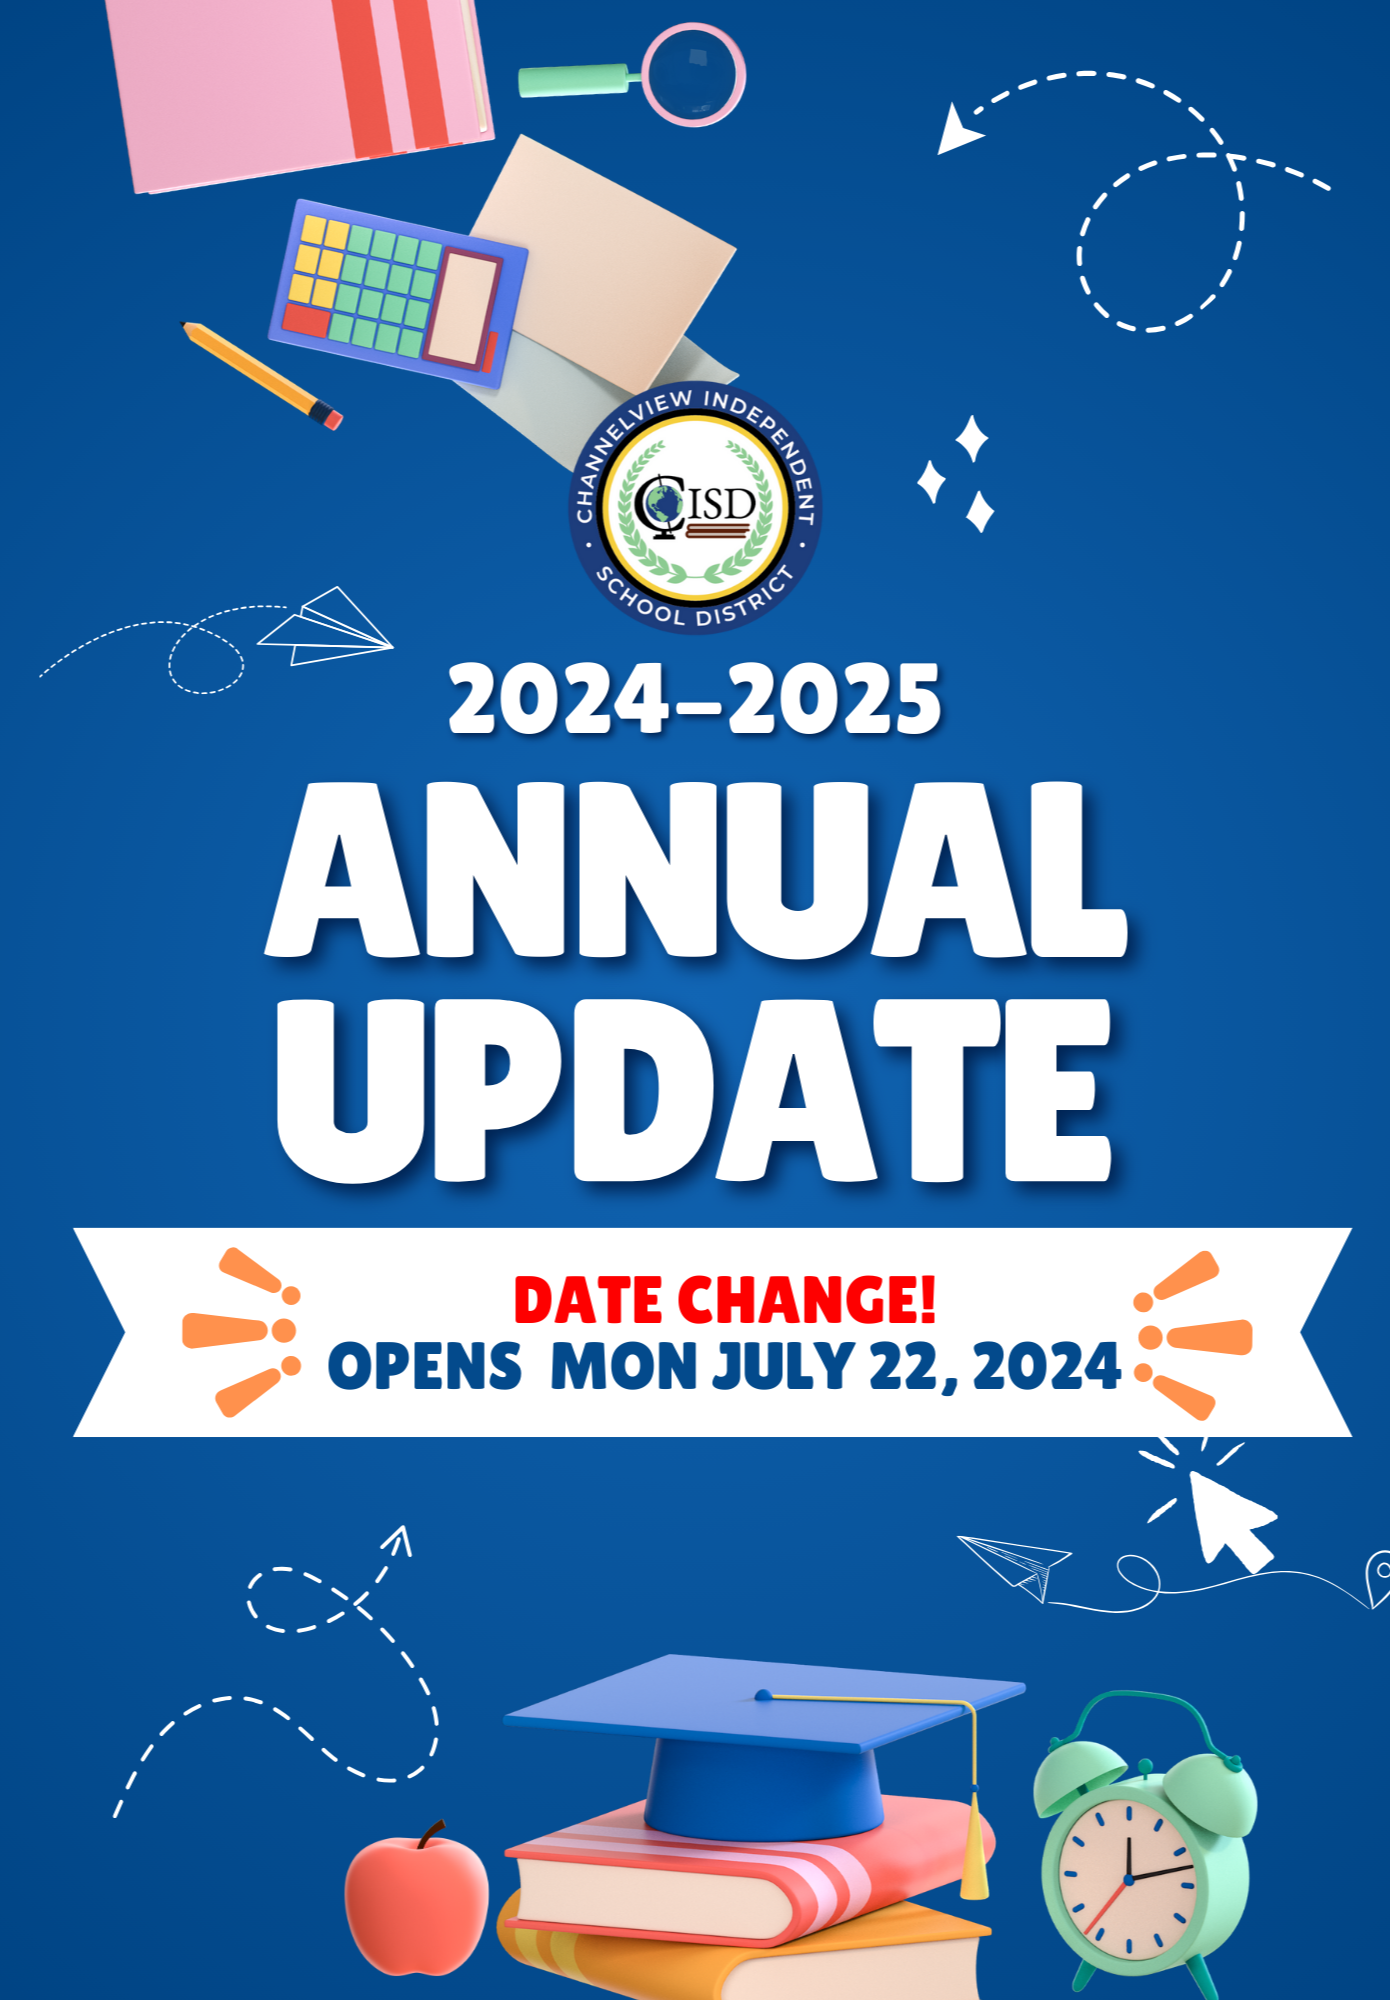 Annual Update Opens July 22th